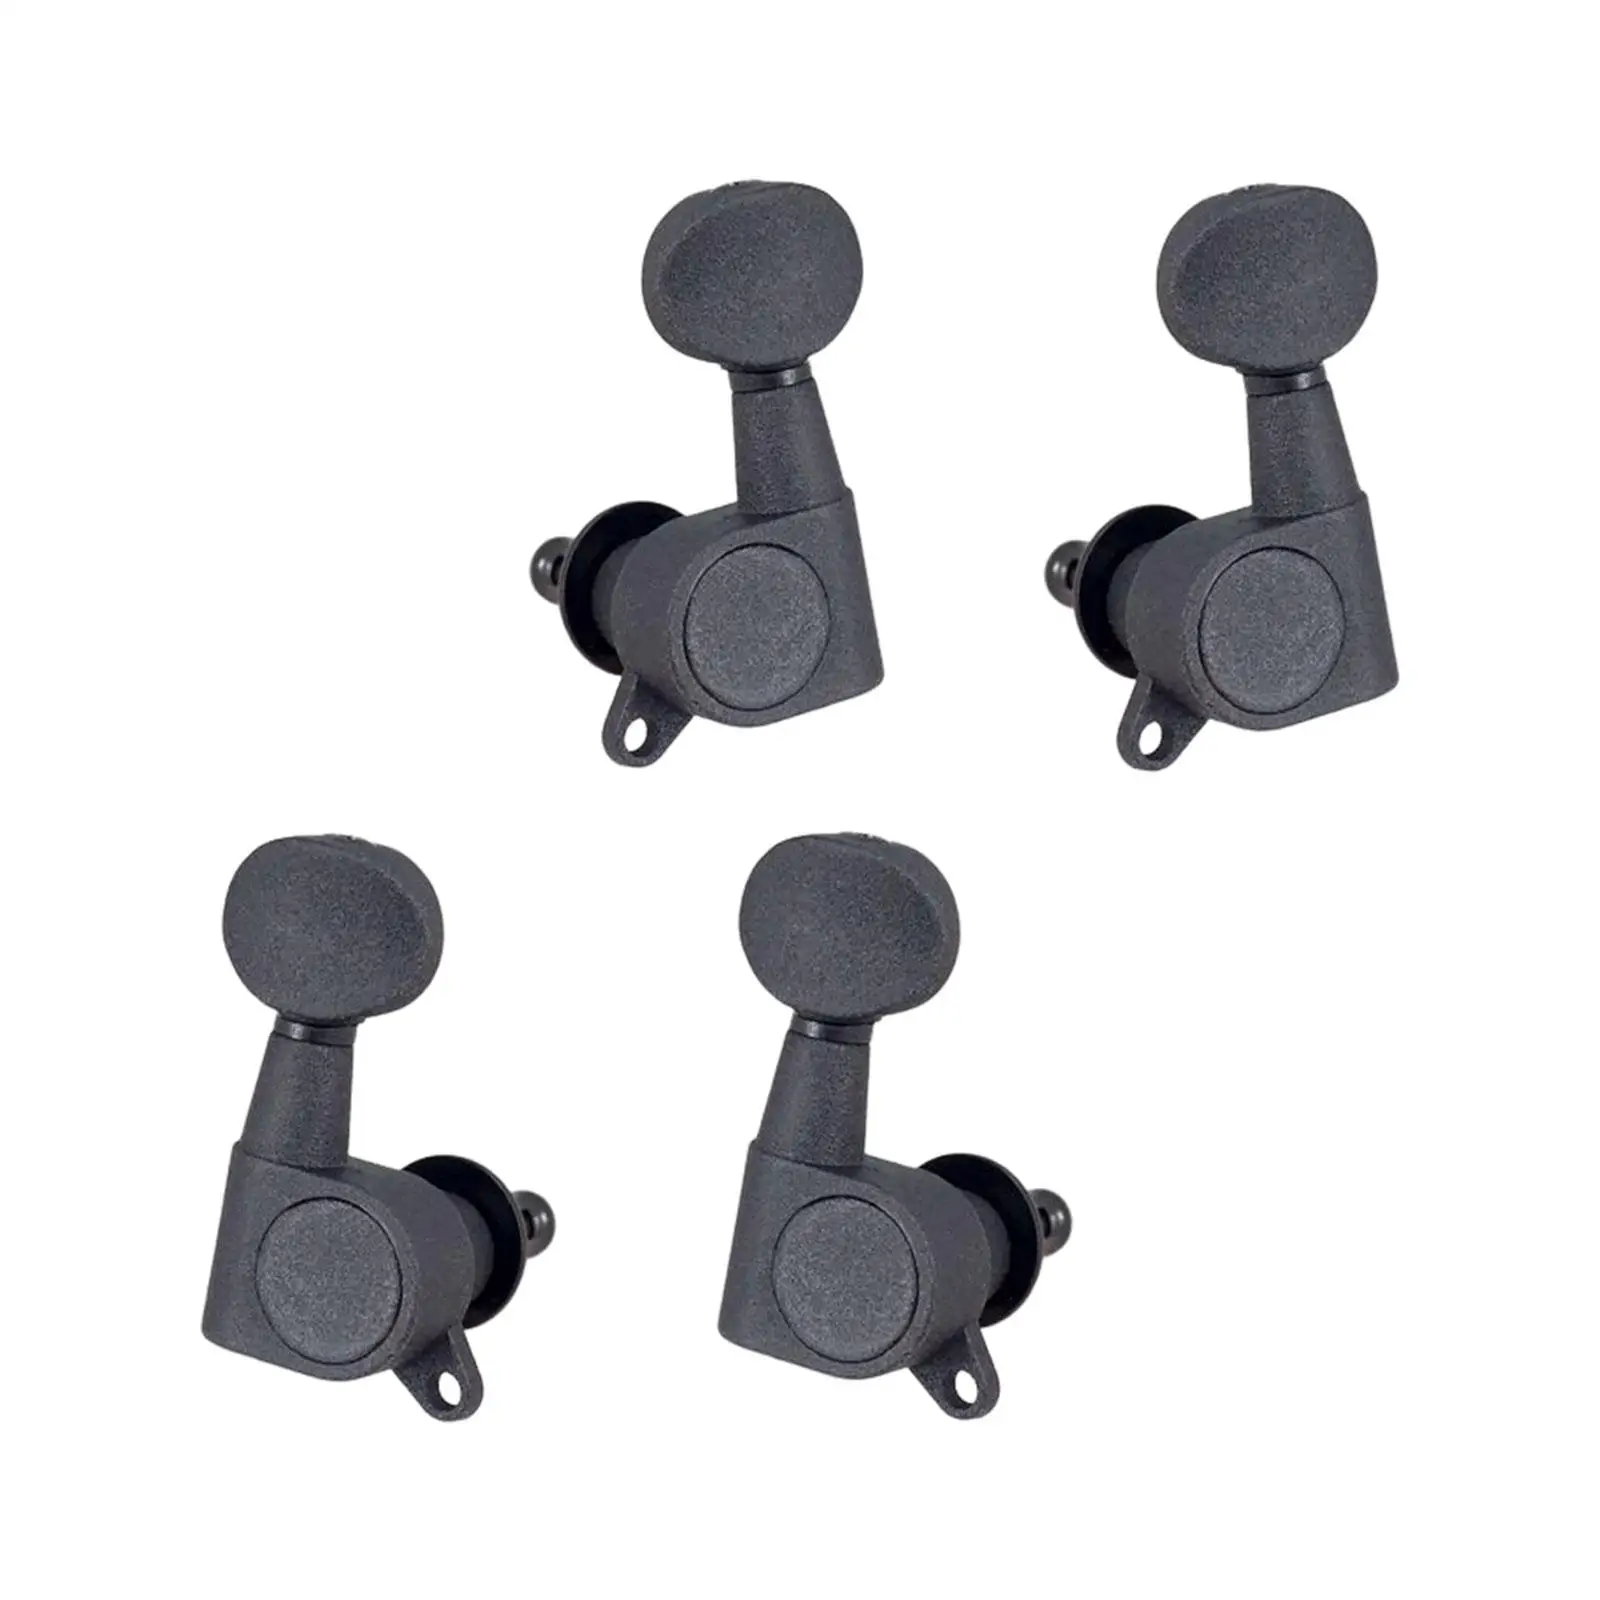 

4 Pieces 2L 2R String Tuning Pegs 2L 2R Ukulele Tuning Pegs Guitar Tuner Peg for Electric Guitar Ukulele Parts Accessories